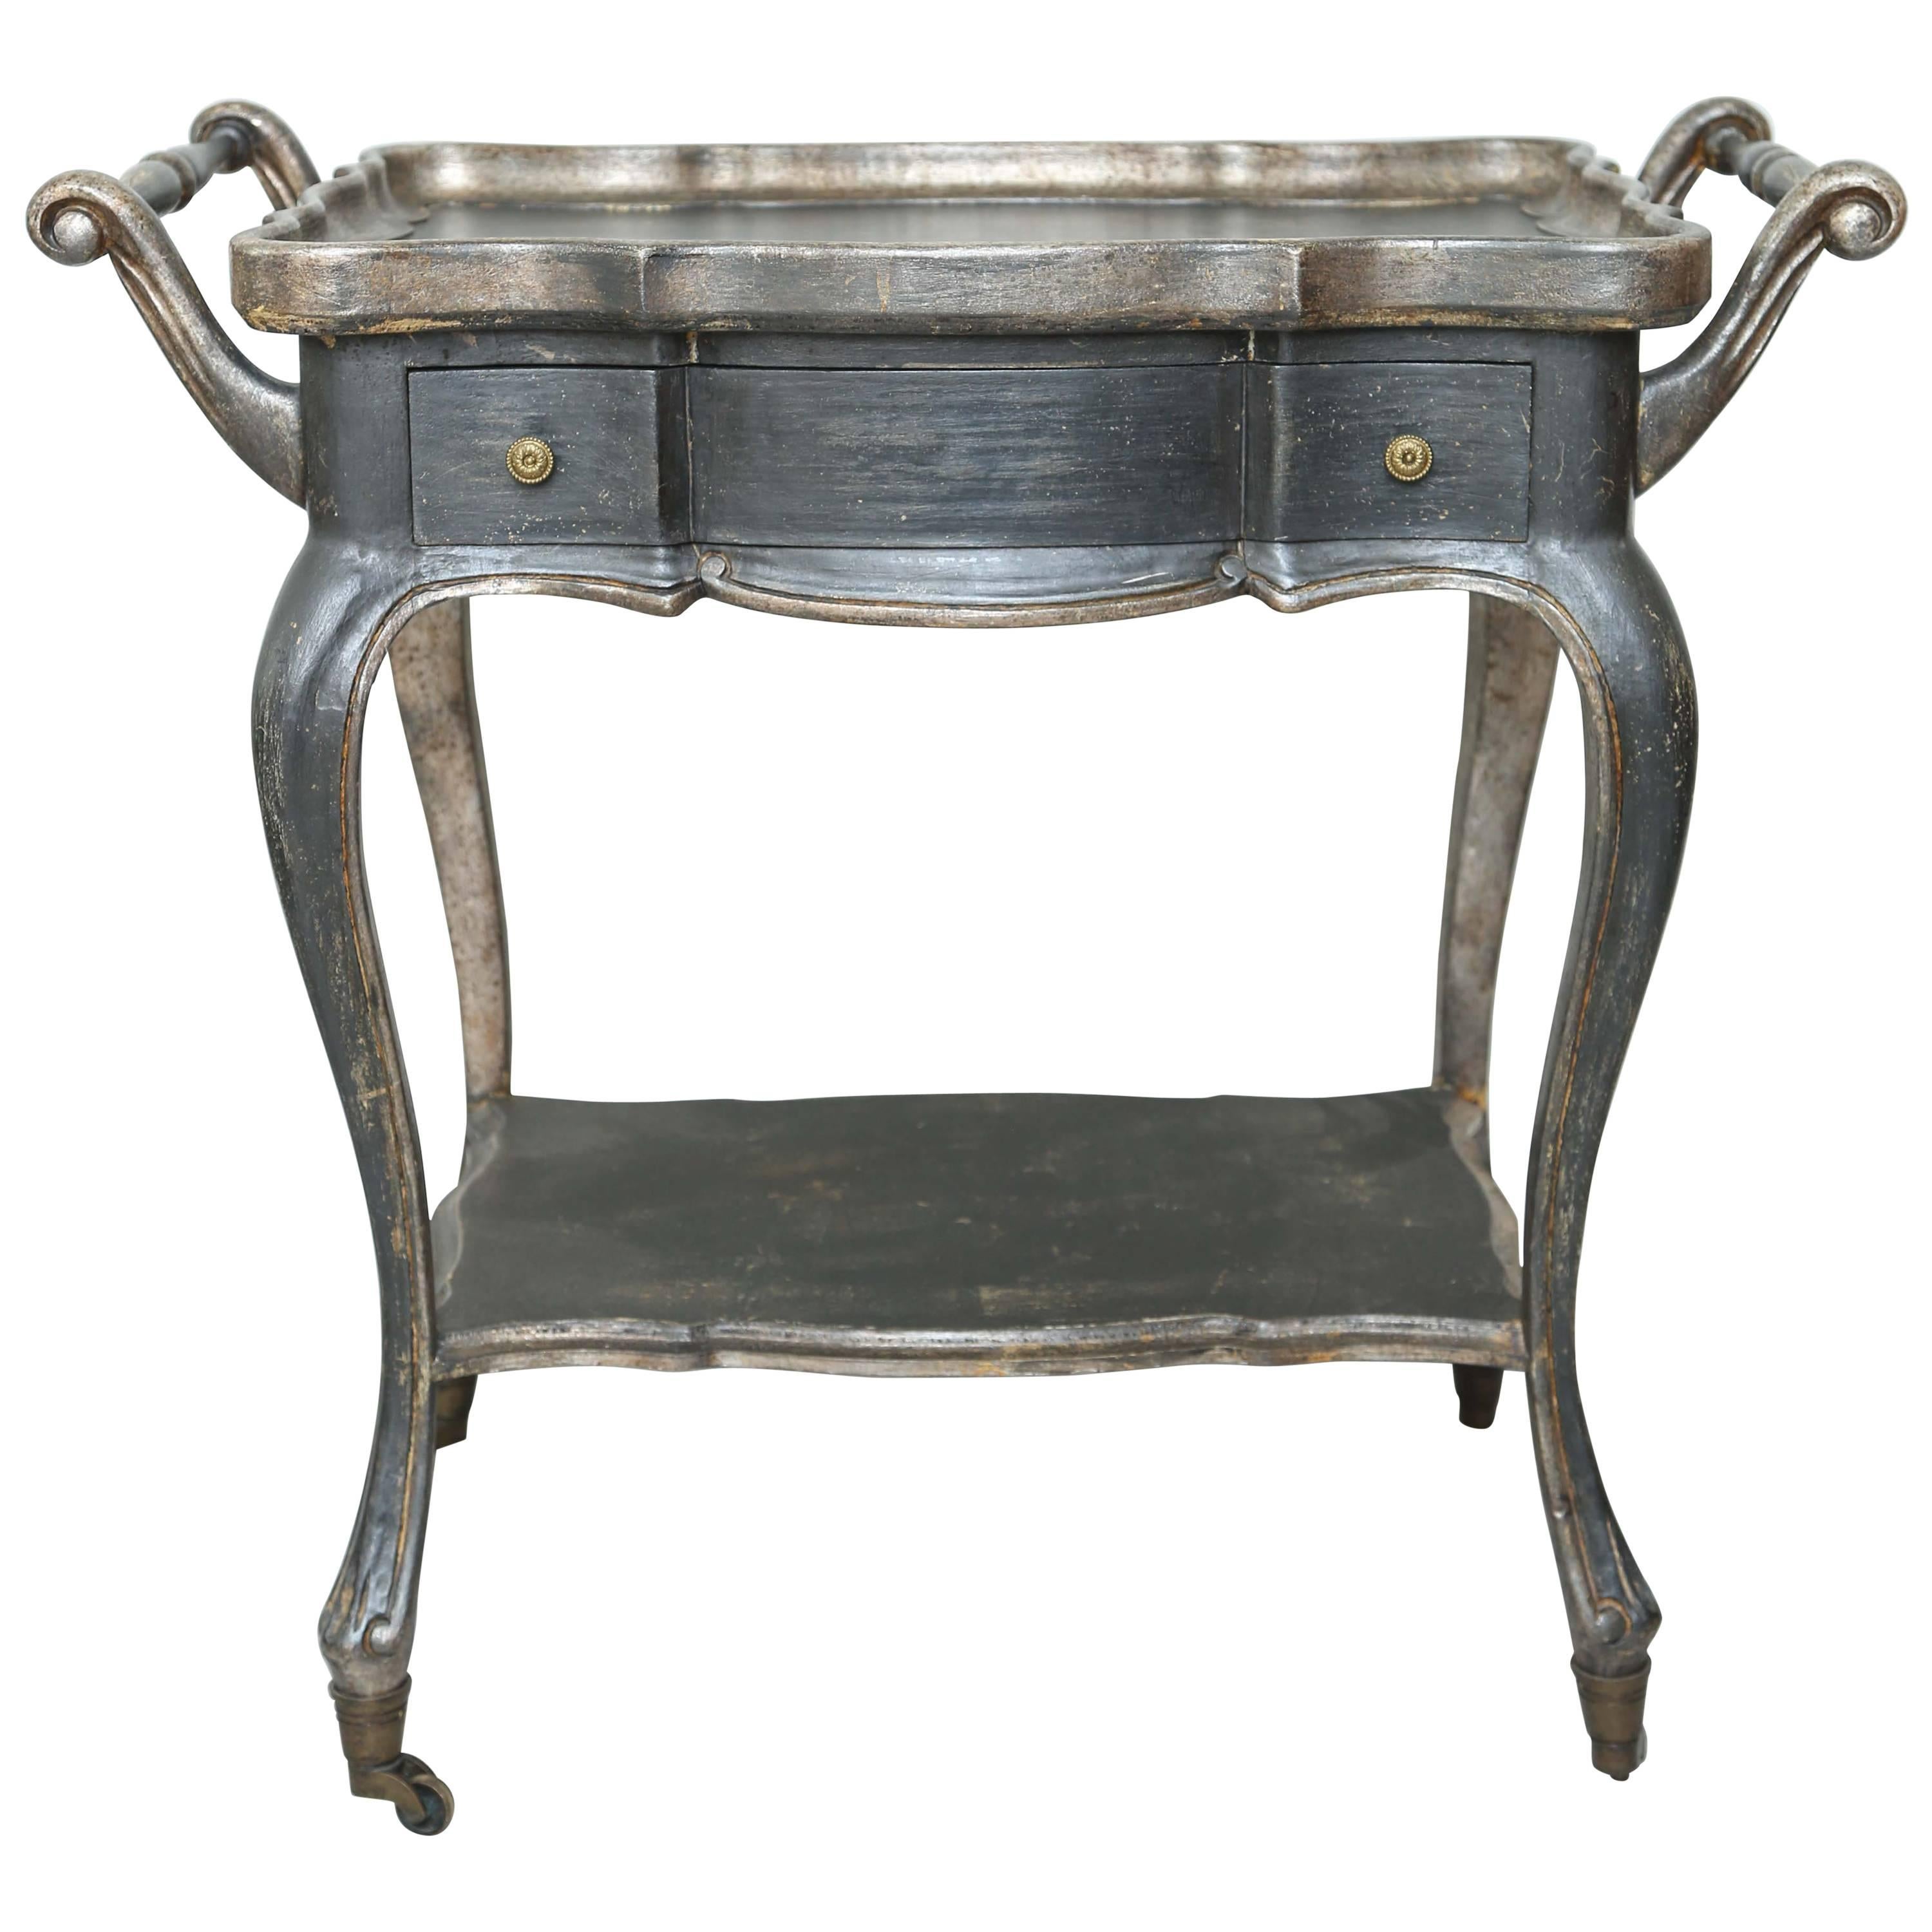 Two-Tier Italian Cart on Casters